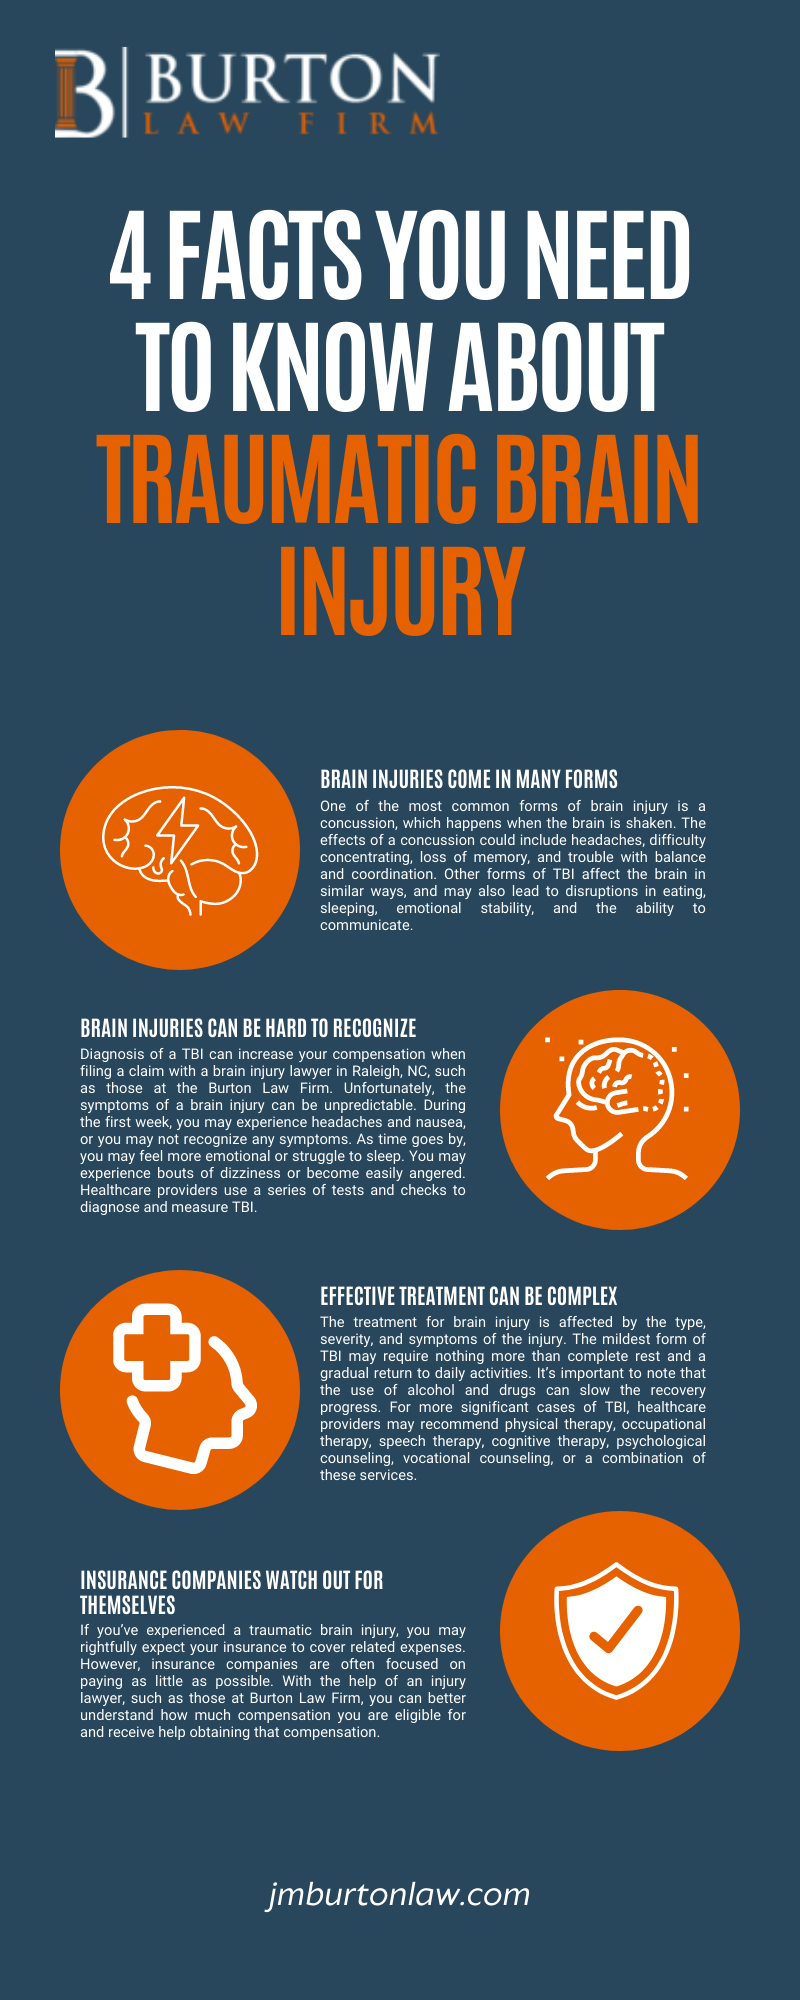 4 Facts You Need To Know About Traumatic Brain Injury